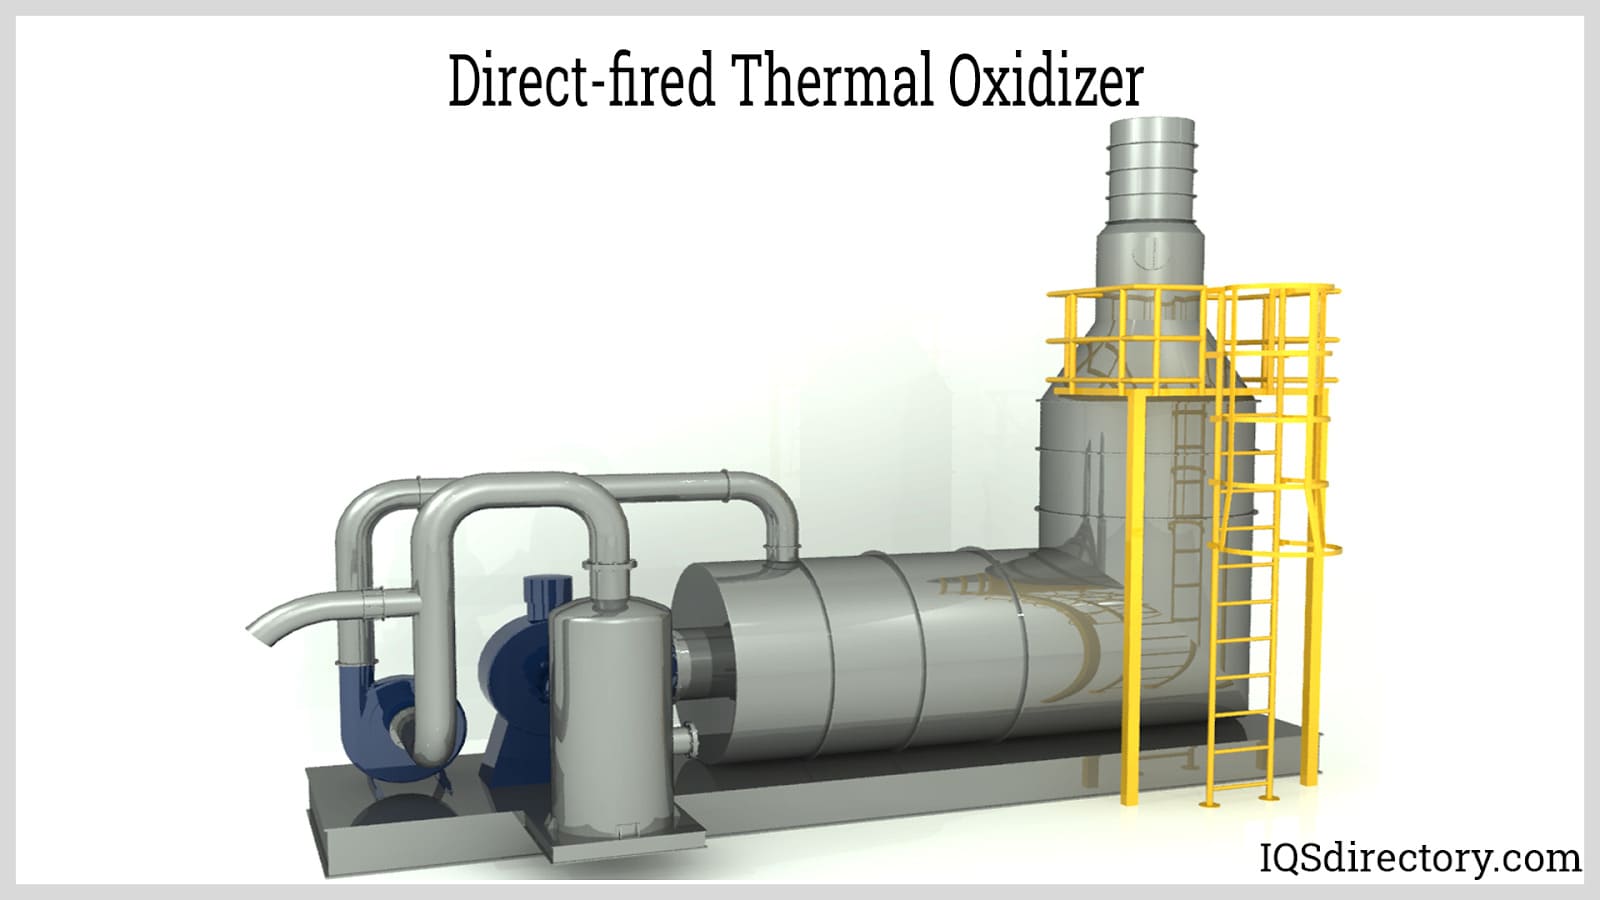 Direct-fired Thermal Oxidizer